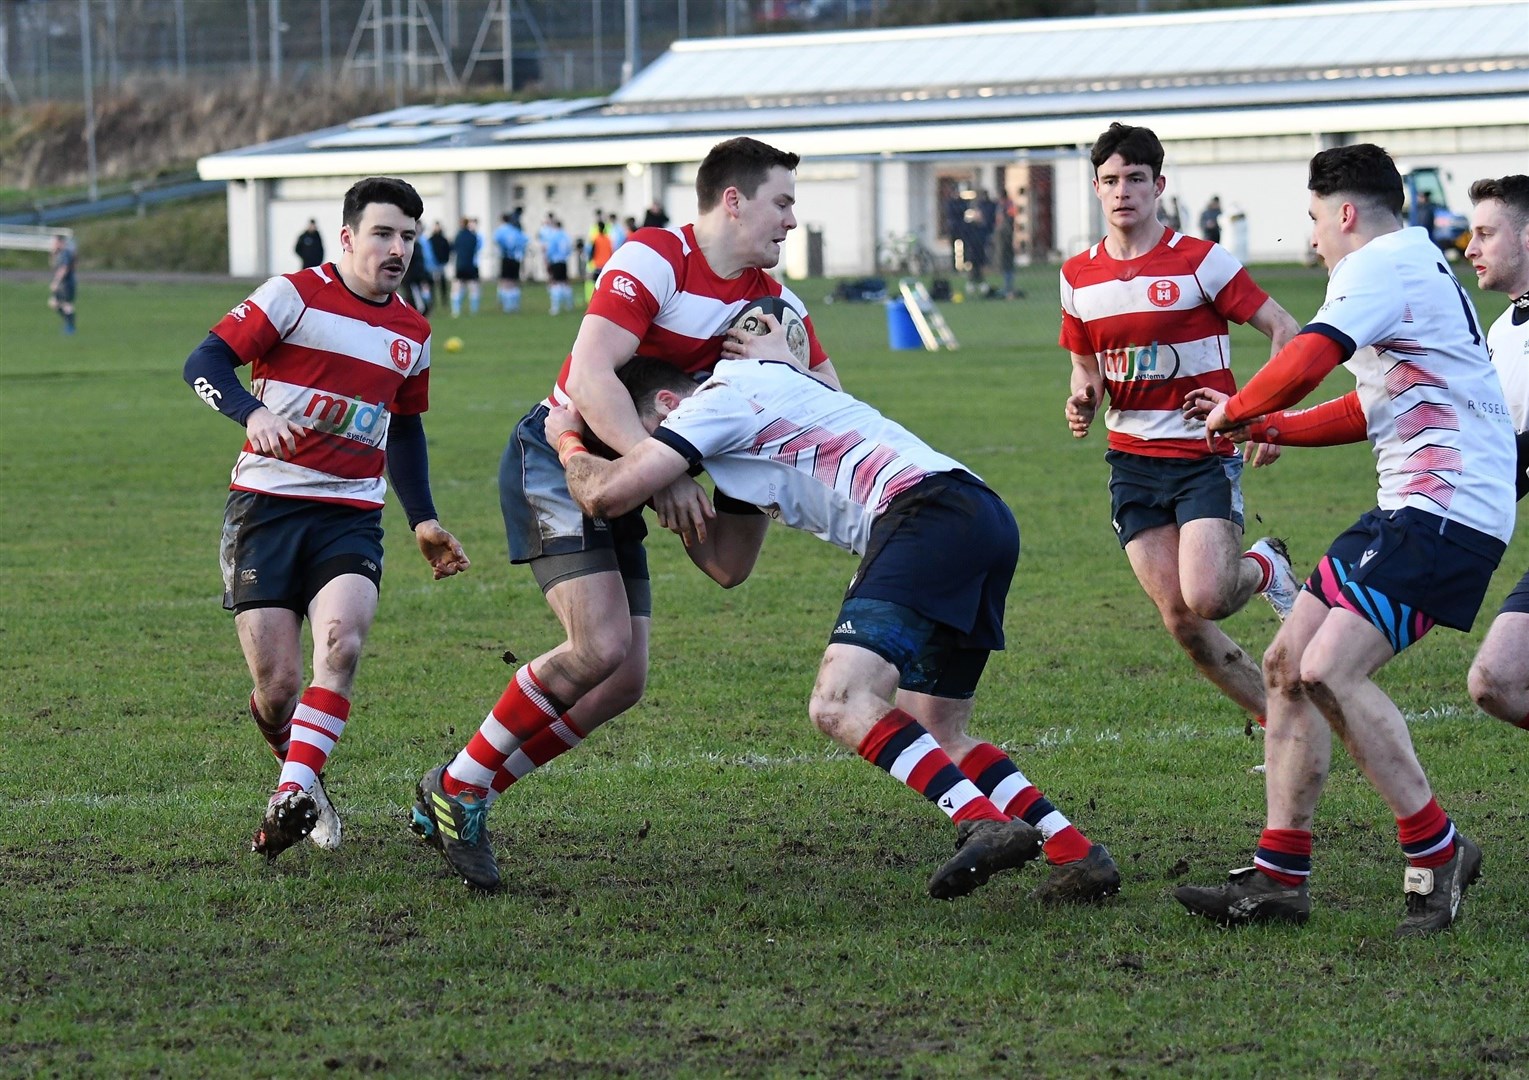 Arran Ruck runs into strong tackle with Calum Archibald and Rory Millar in support. Photo: James Officer